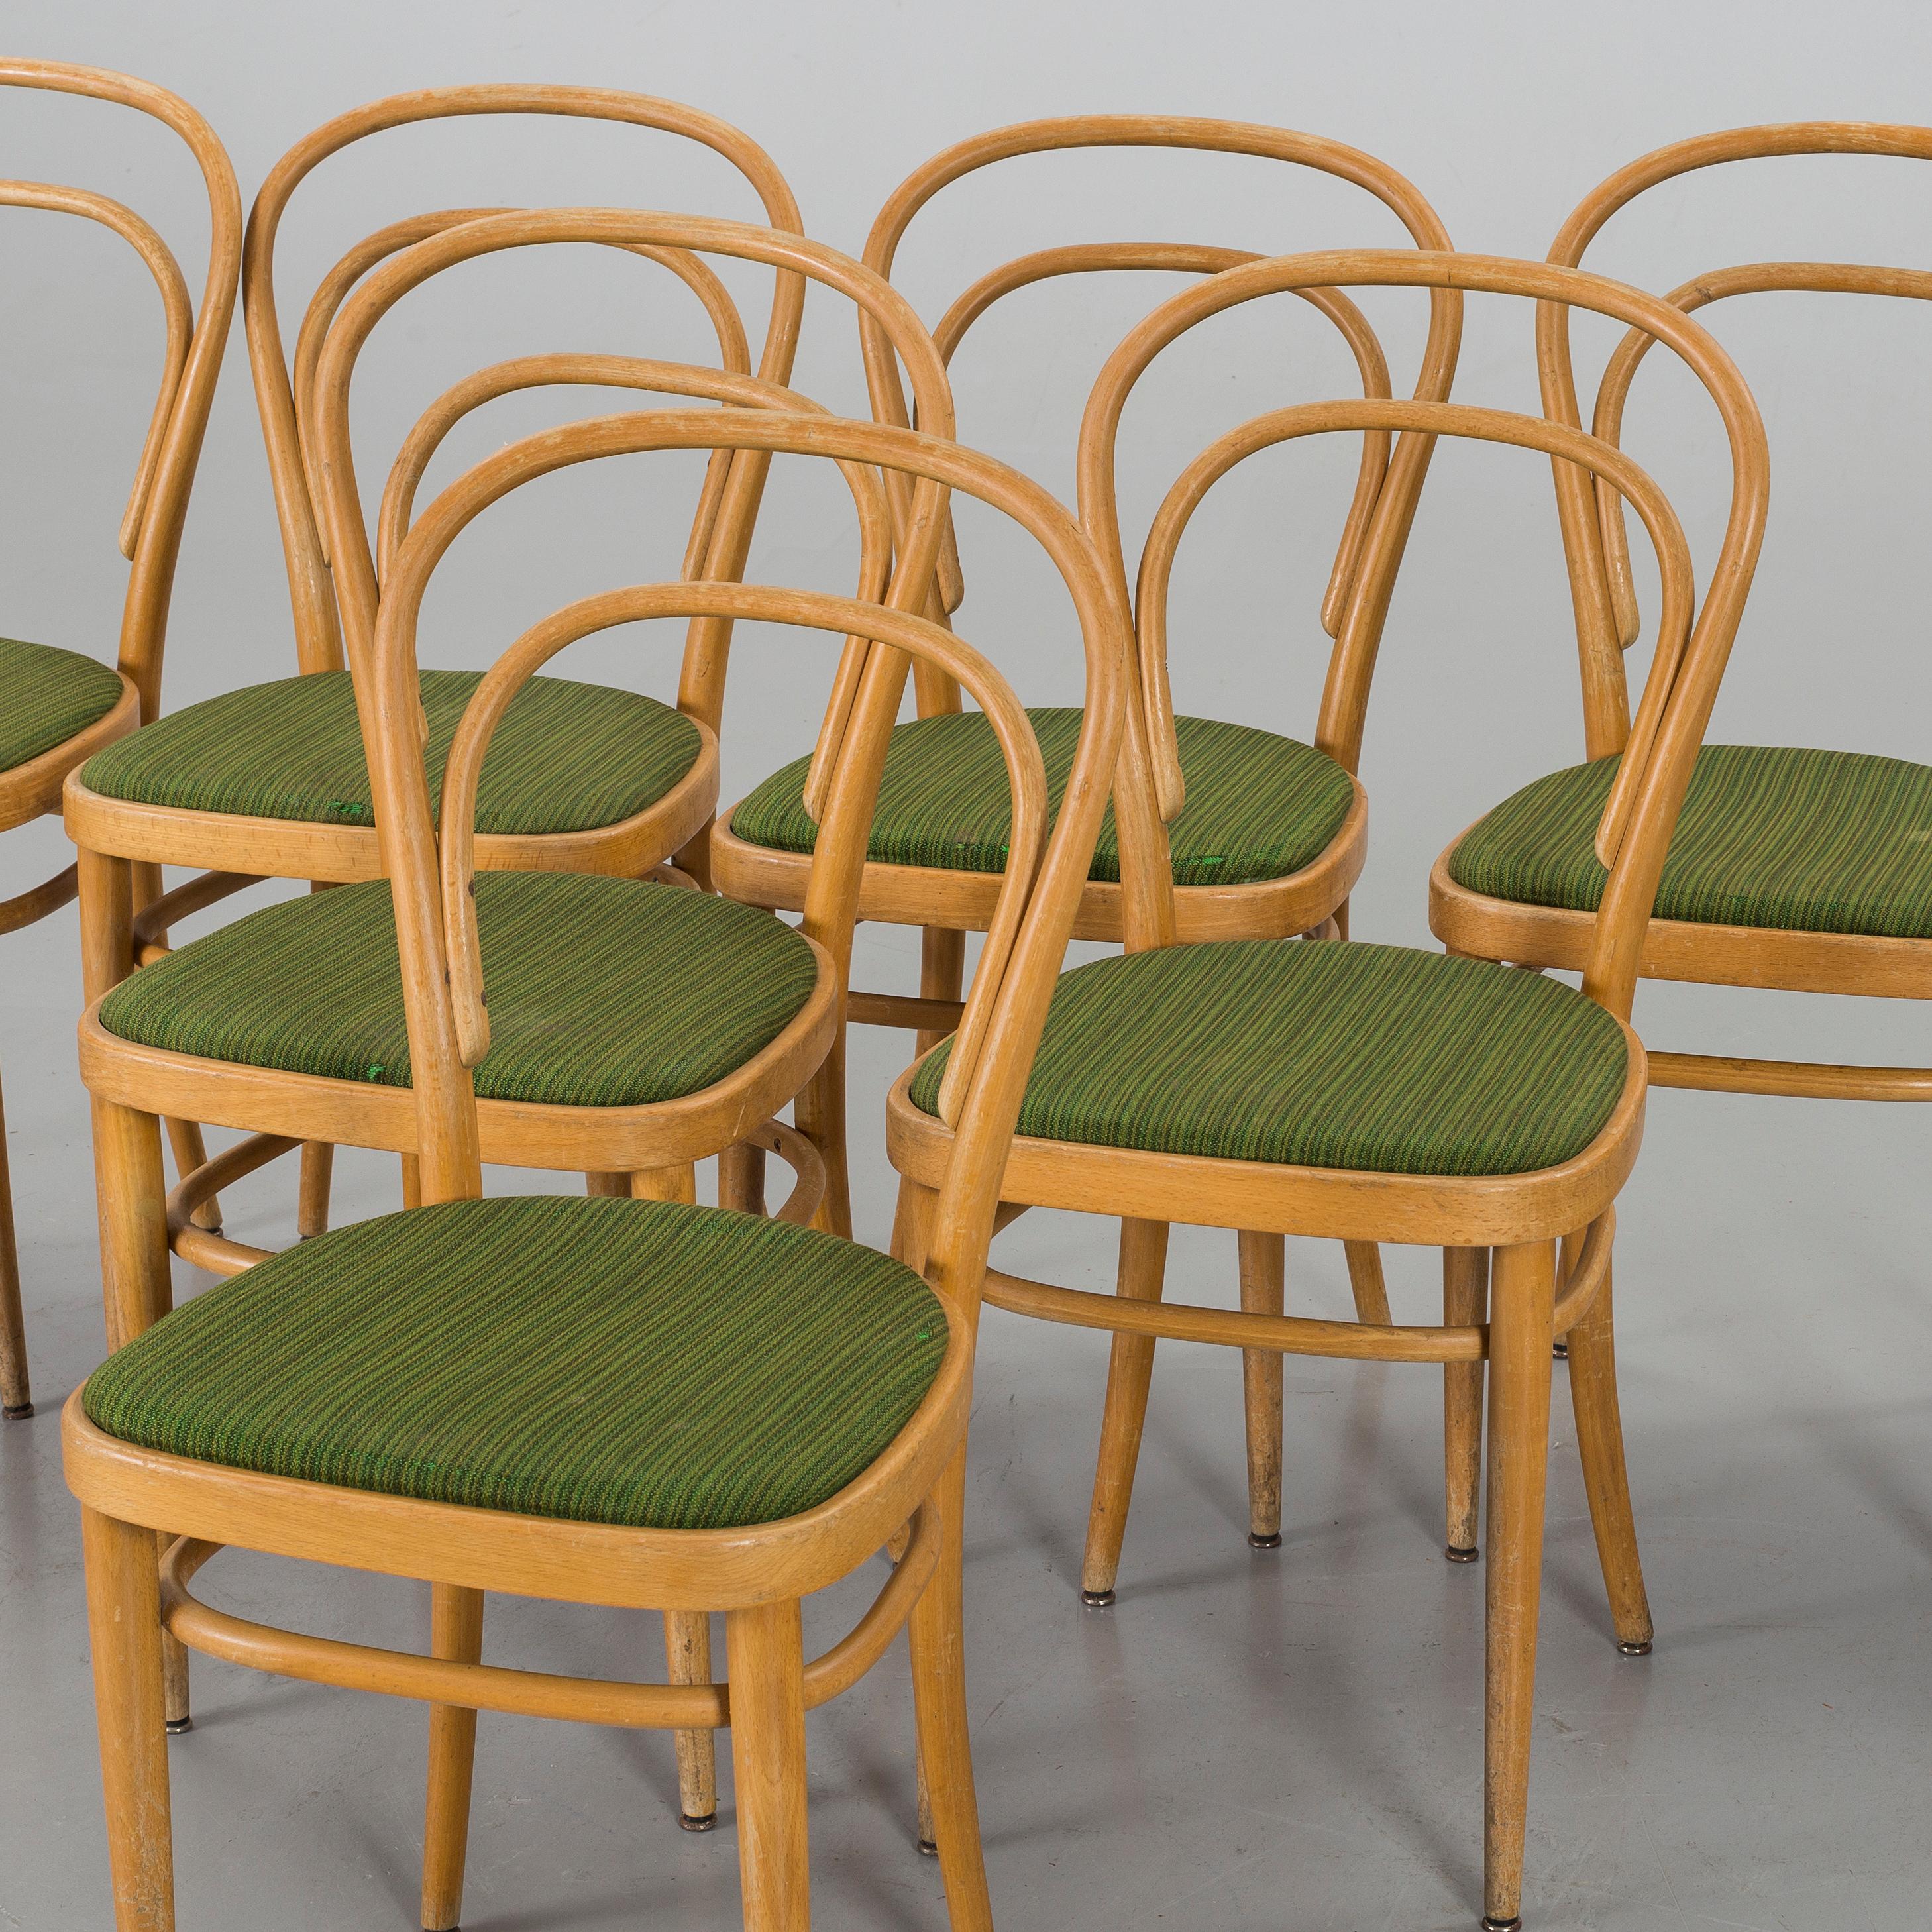 Set of eight Thonet beech bentwood chairs, made in mid-20th century.